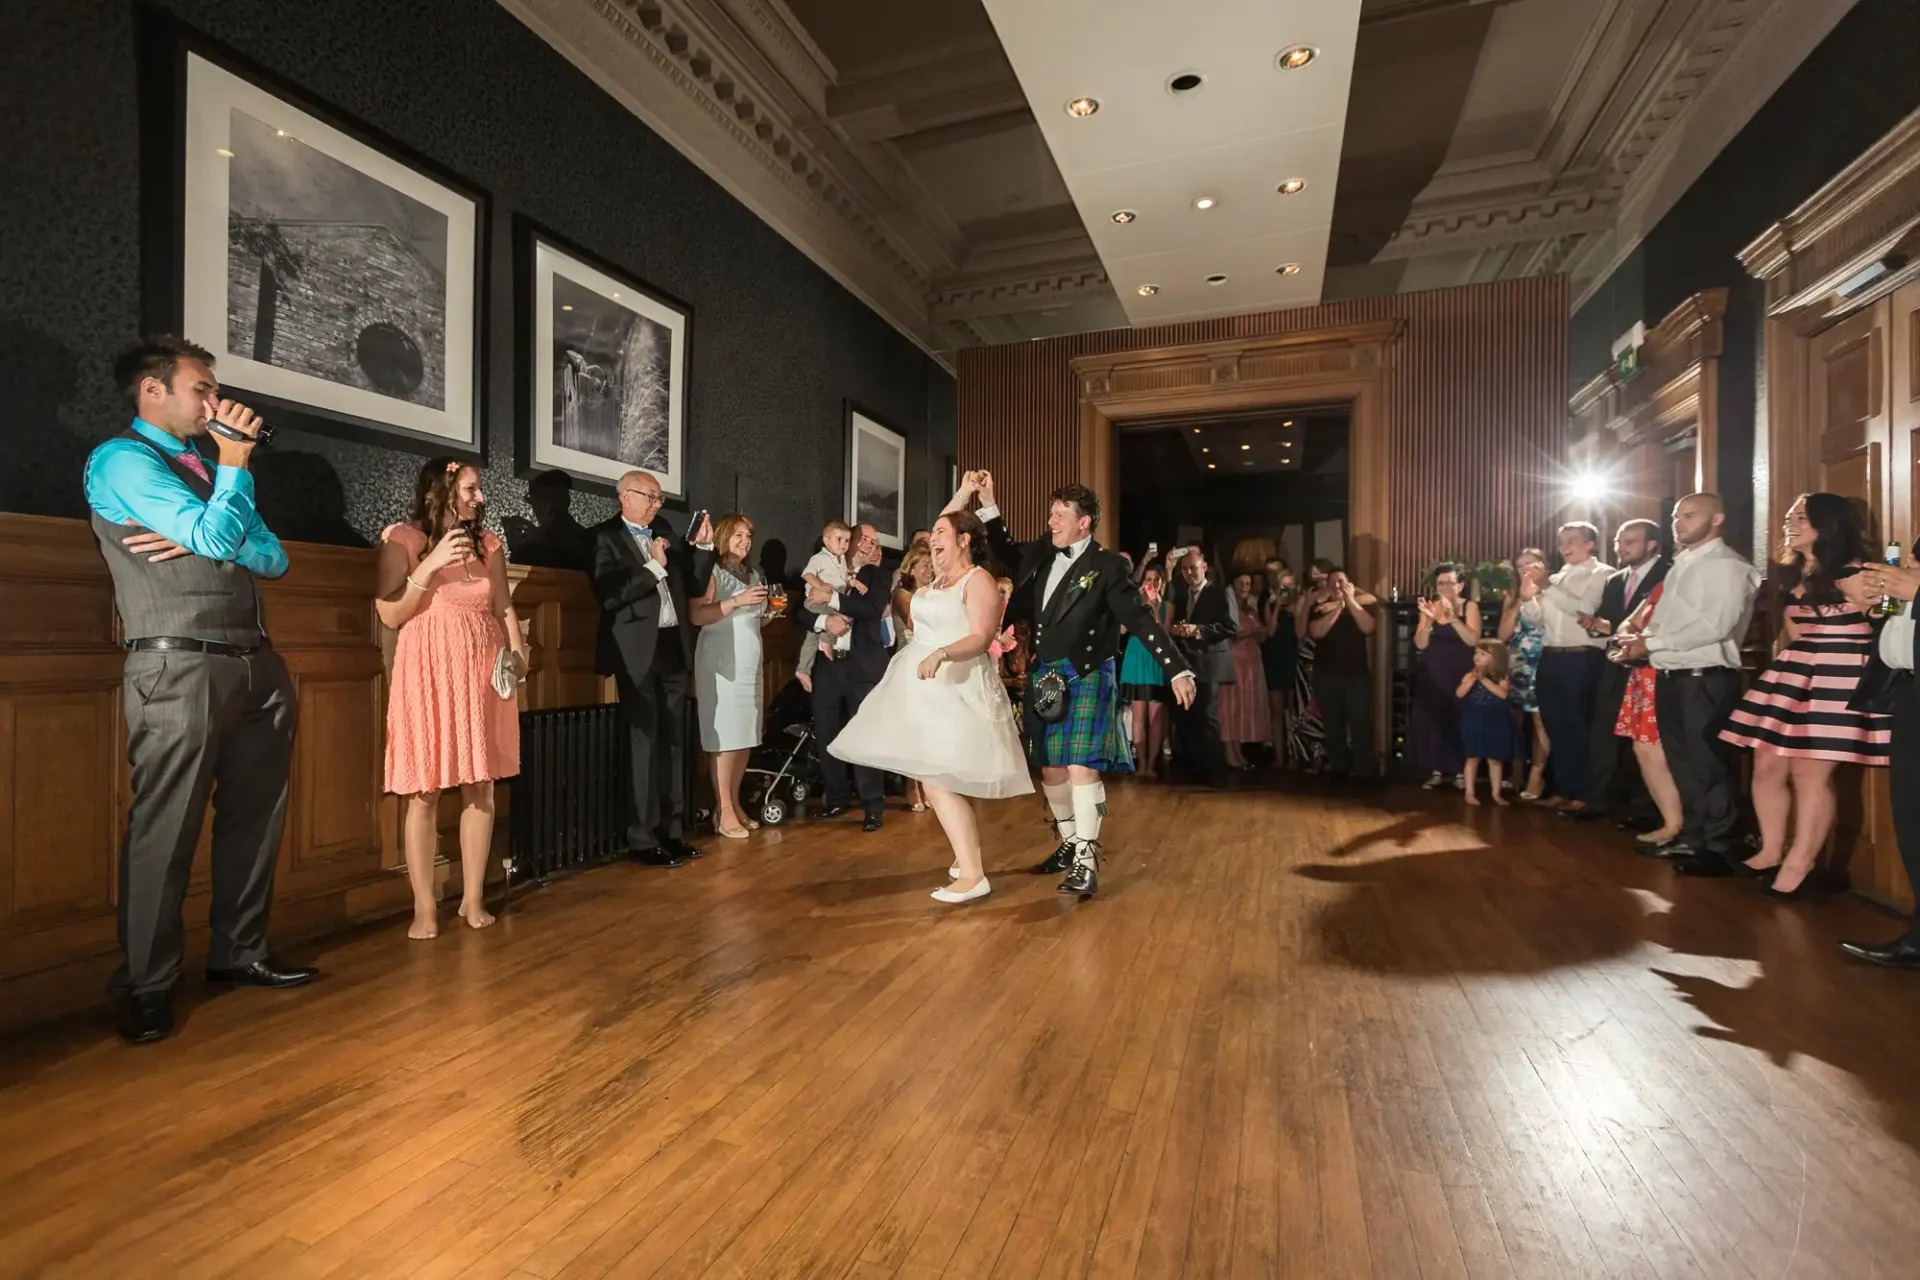 A bride and groom dancing joyfully in a ballroom surrounded by cheering guests and a photographer capturing the moment.